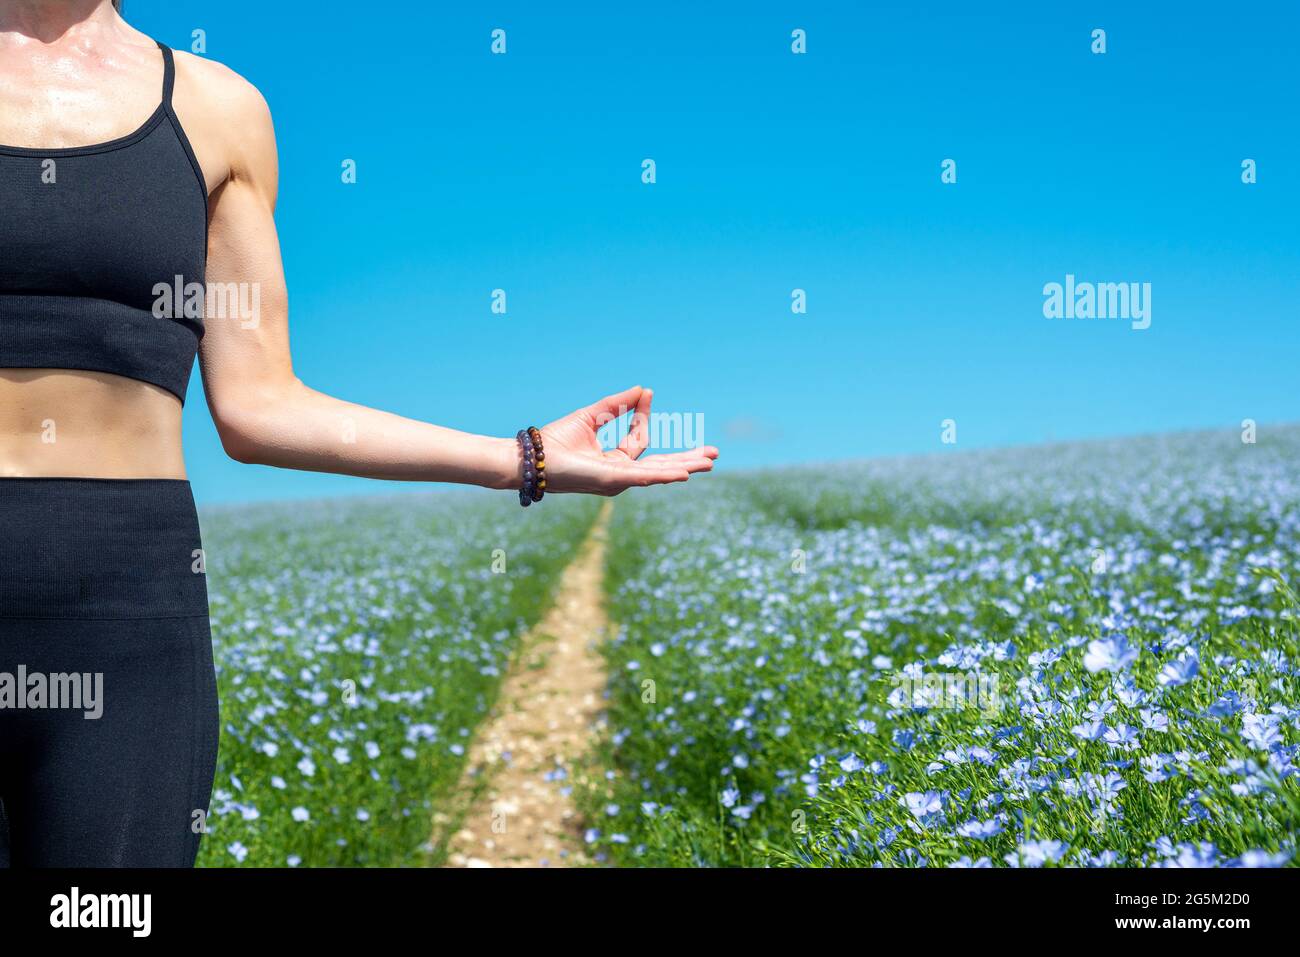 close up of a woman practicing yoga and meditation in a field with wild flowers and blue sky. Stock Photo